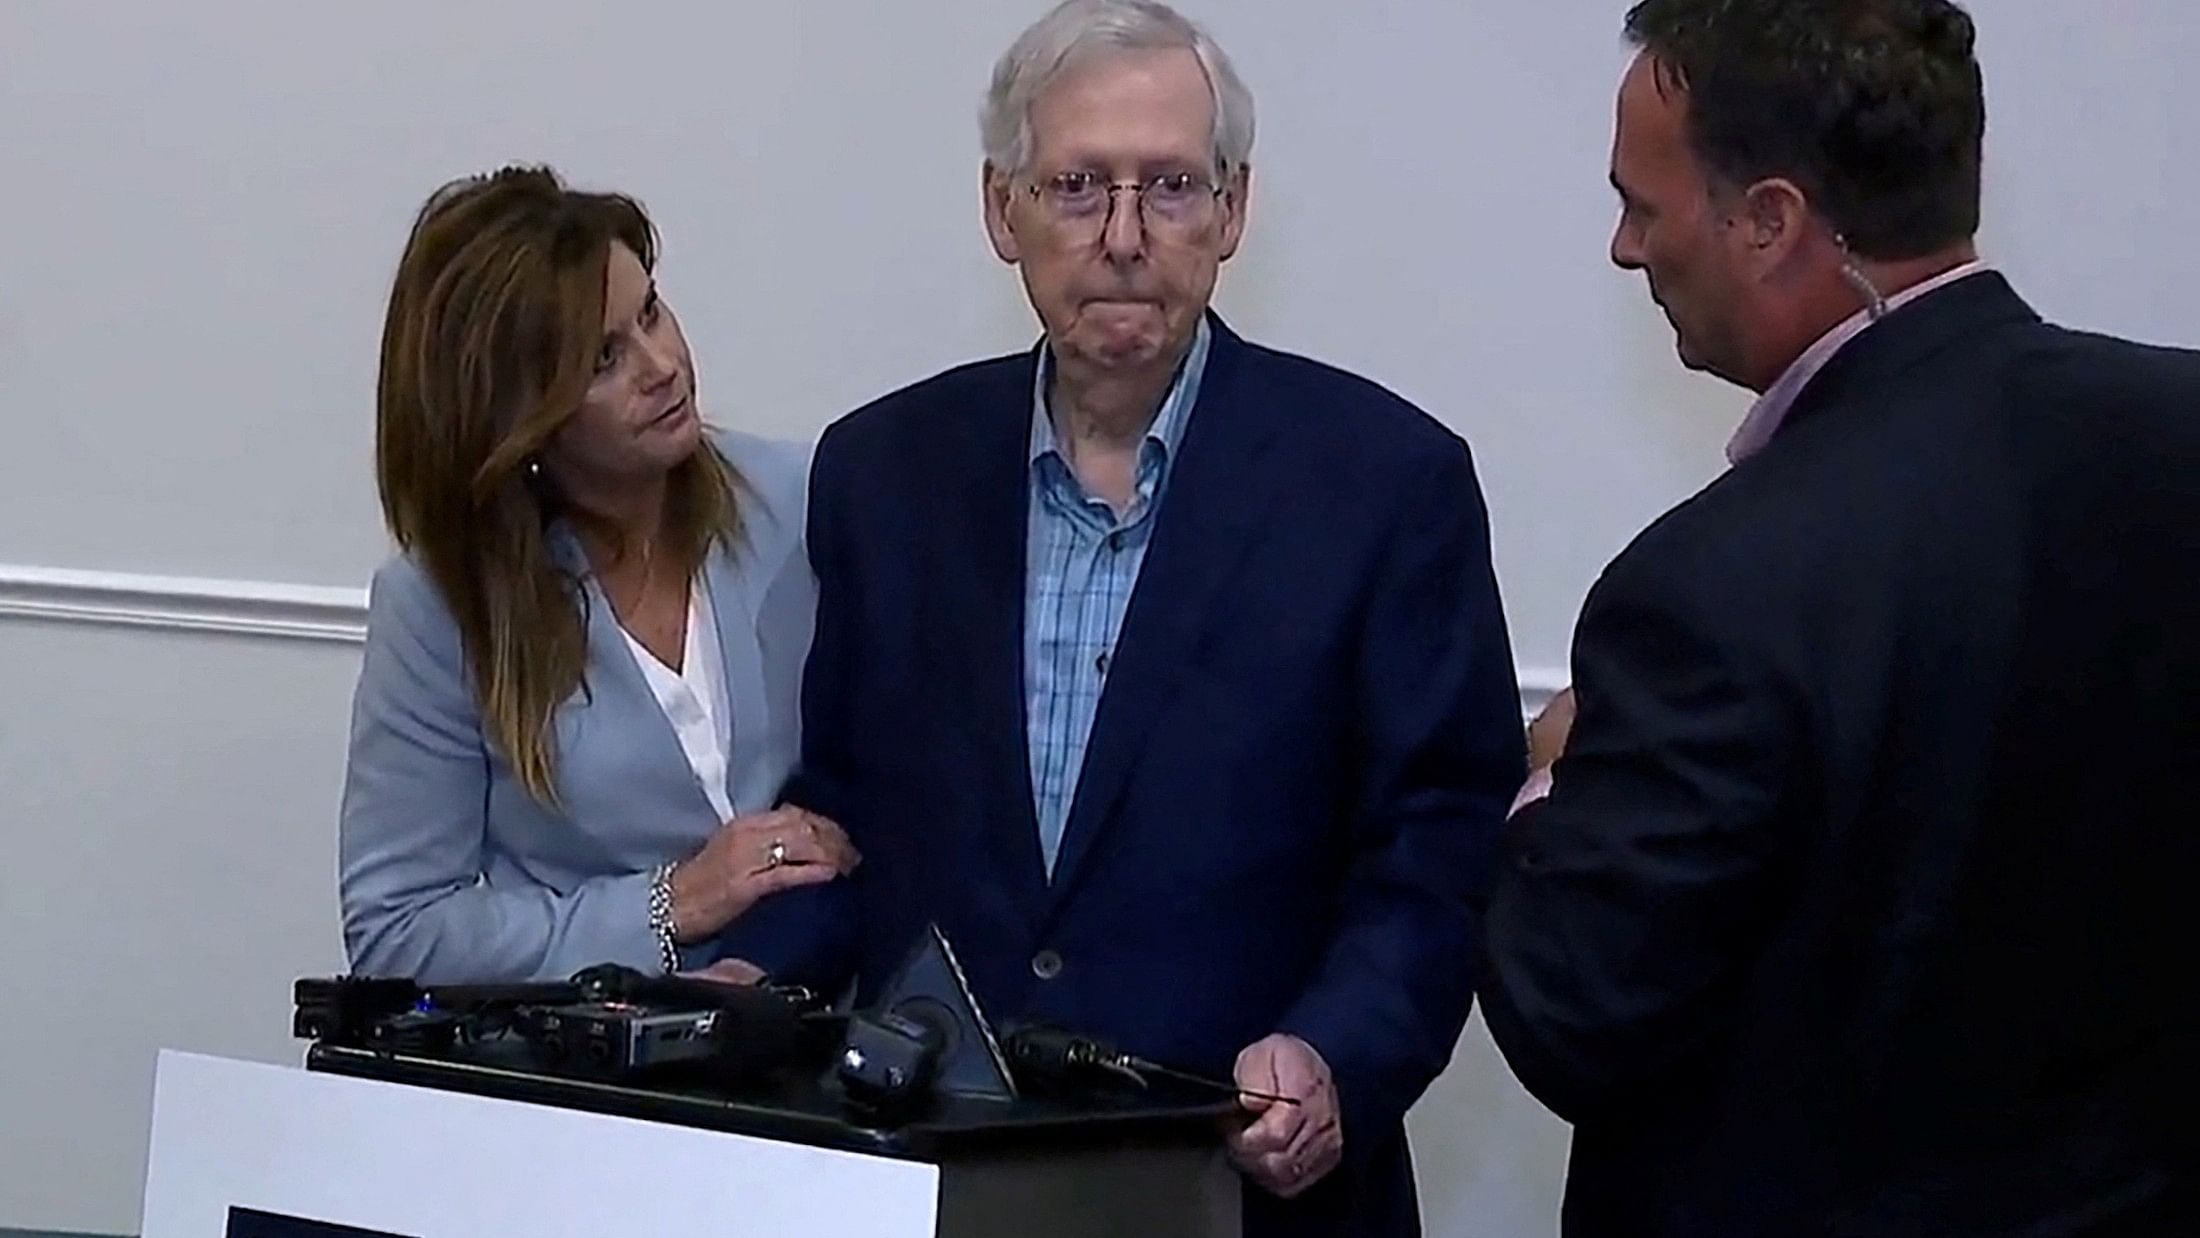 <div class="paragraphs"><p>Top U.S. Senate Republican Mitch McConnell appears to freeze up for more than 30 seconds during a public appearance before he was escorted away, the second such incident in a little more than a month, after an event with the Northern Kentucky Chamber of Commerce in Covington, Kentucky, U.S. August 30, 2023 in a still image from video.  </p></div>